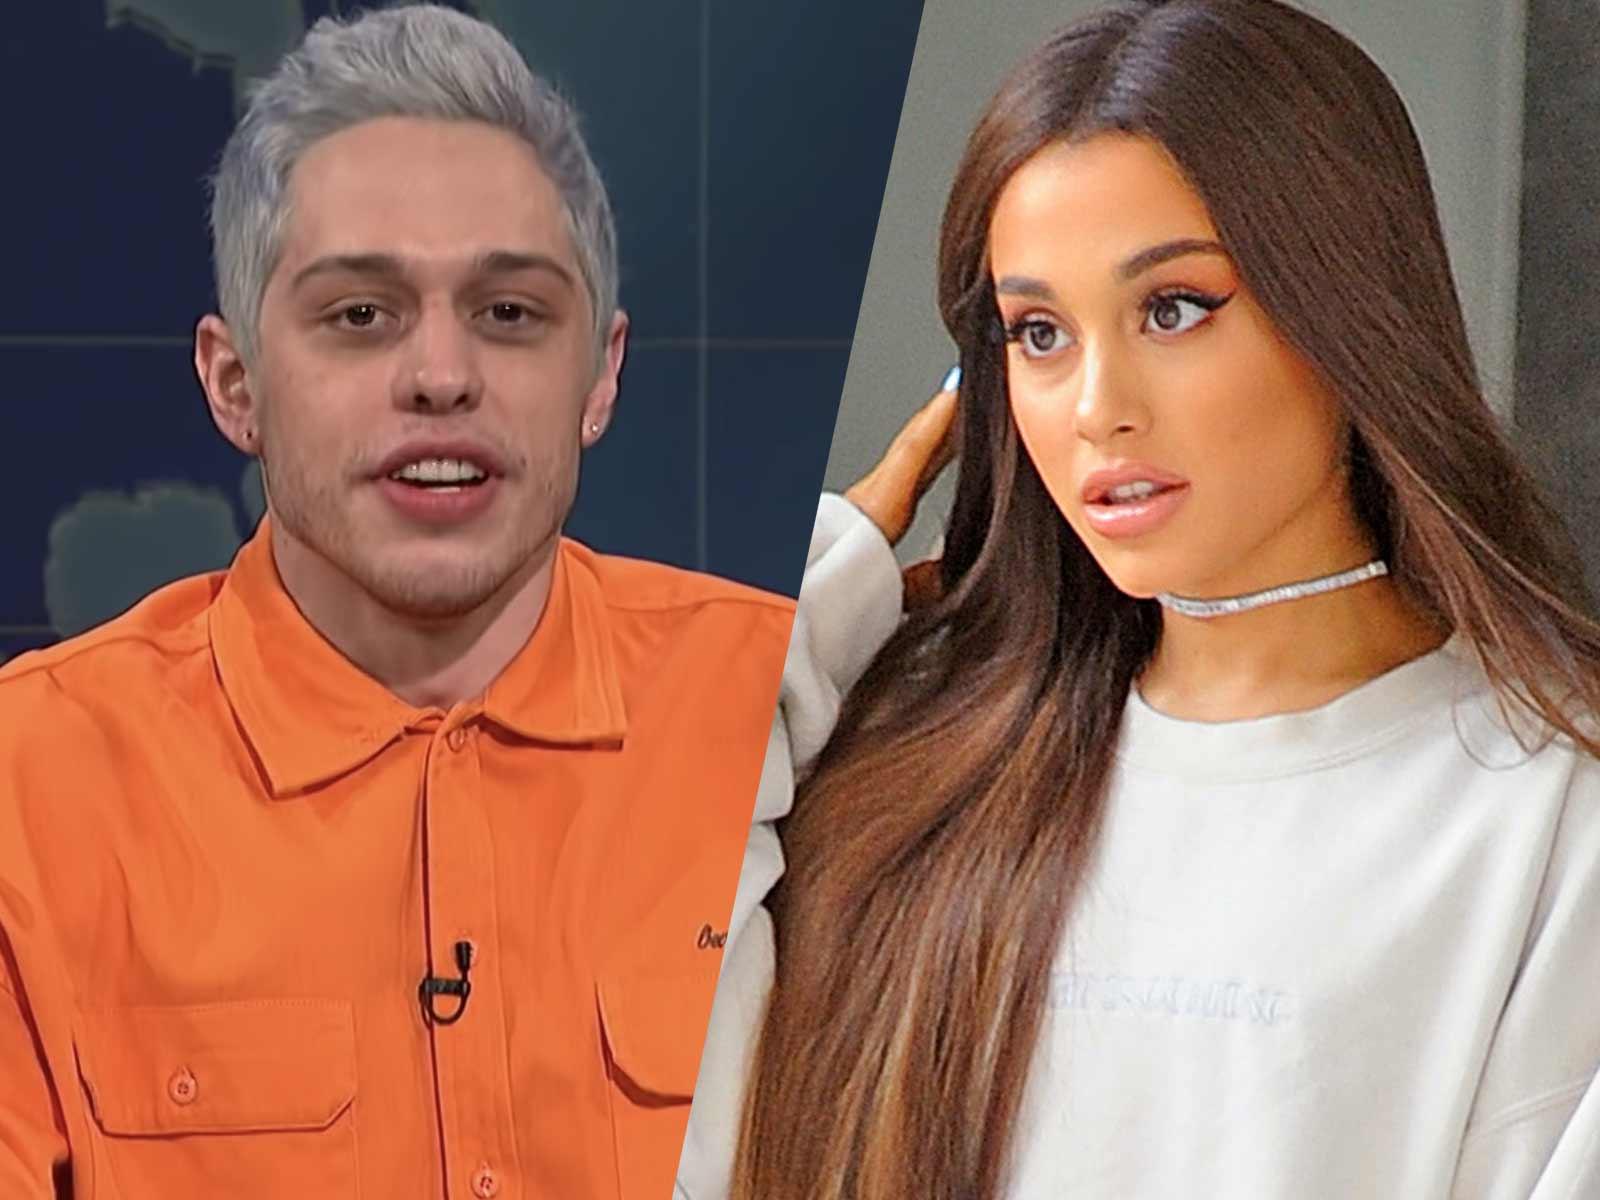 Pete Davidson Addresses Ariana Grande Breakup: ‘She’s a Wonderful, Strong Person’